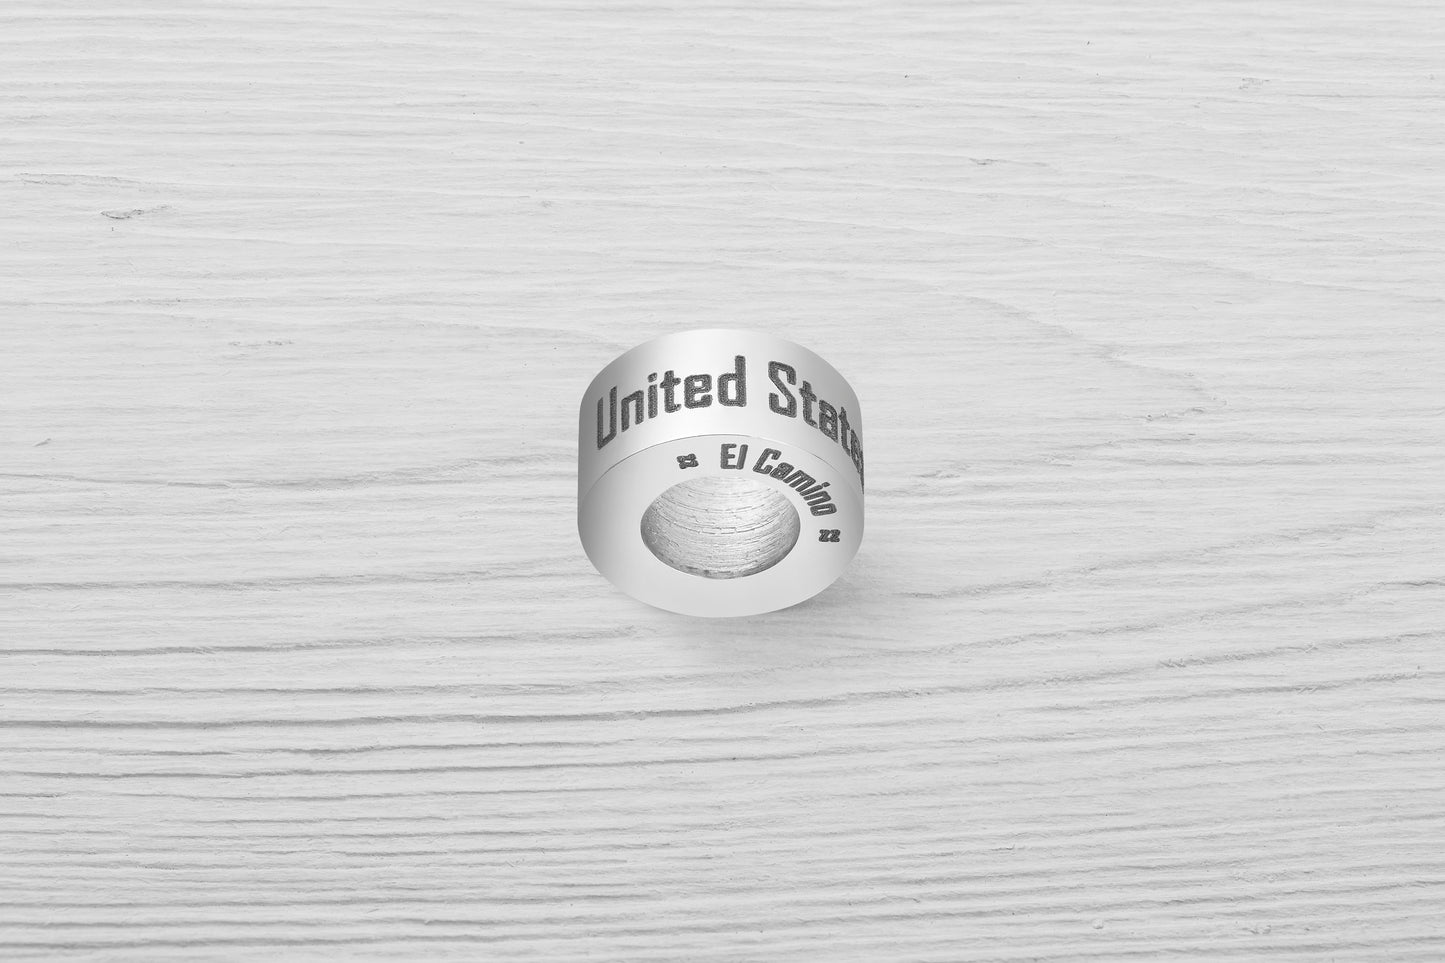 El Camino United States of America Country Step Travel Charm Bead